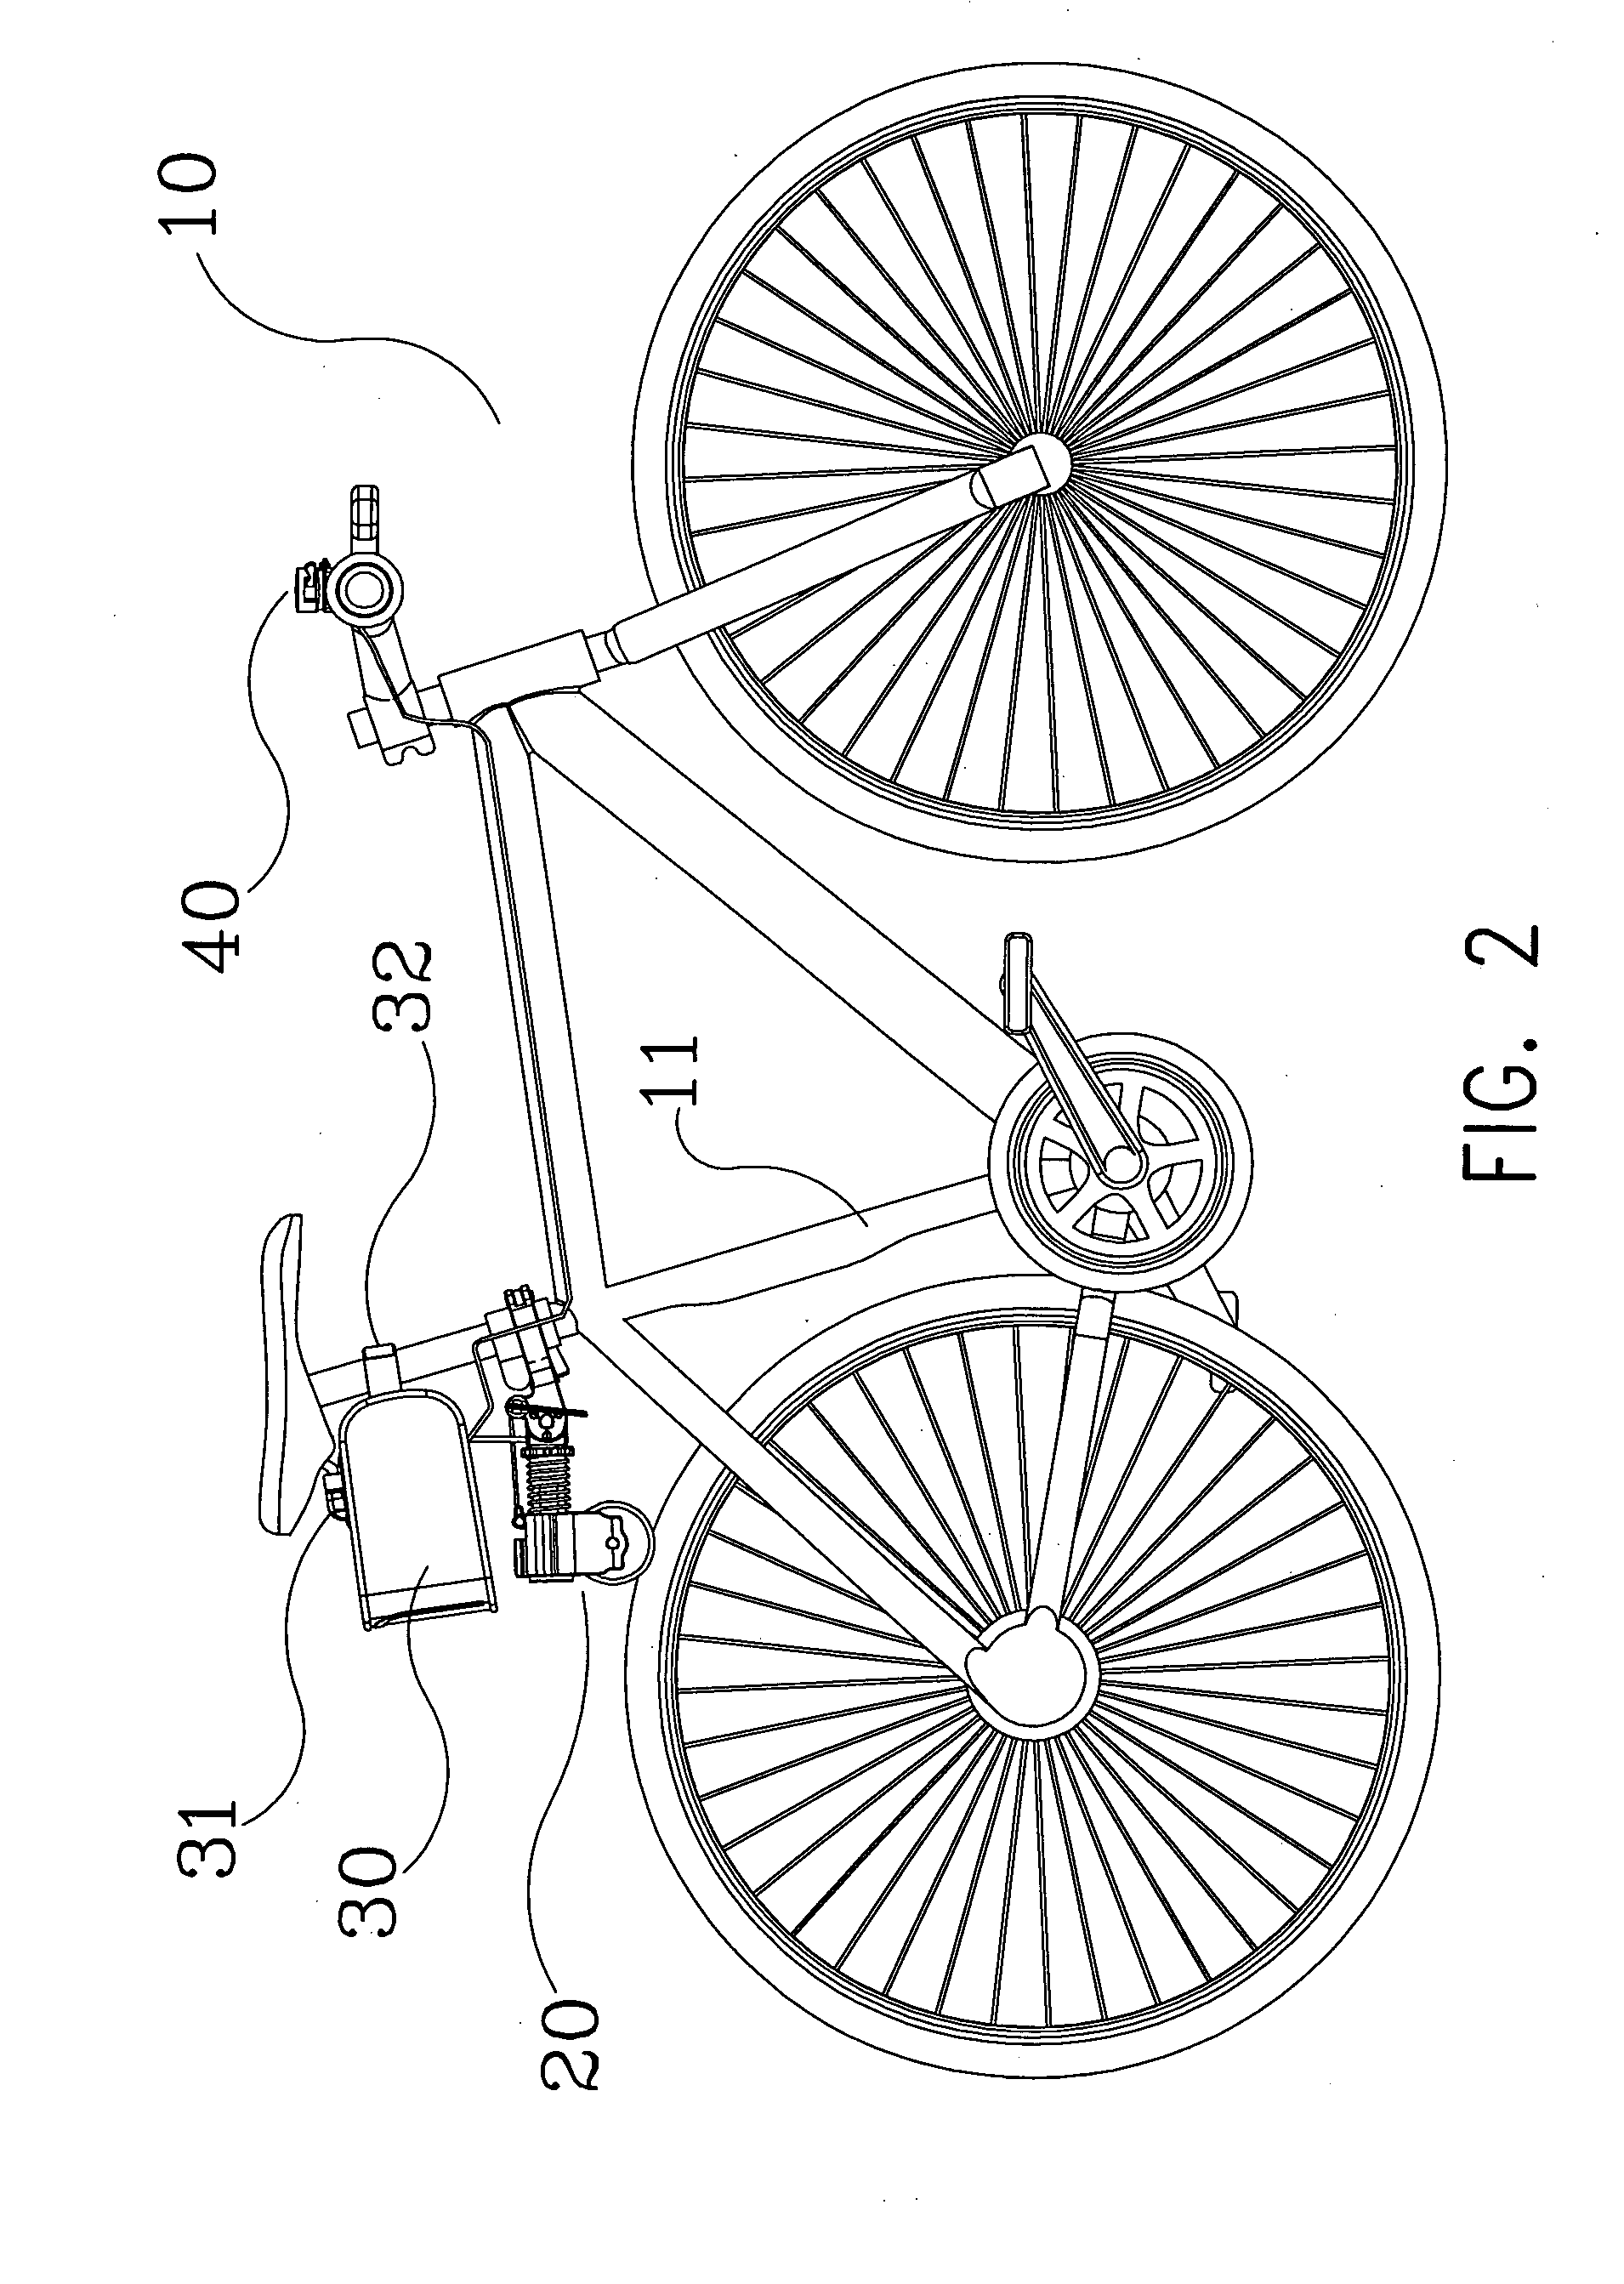 Bicycle-running assistant system